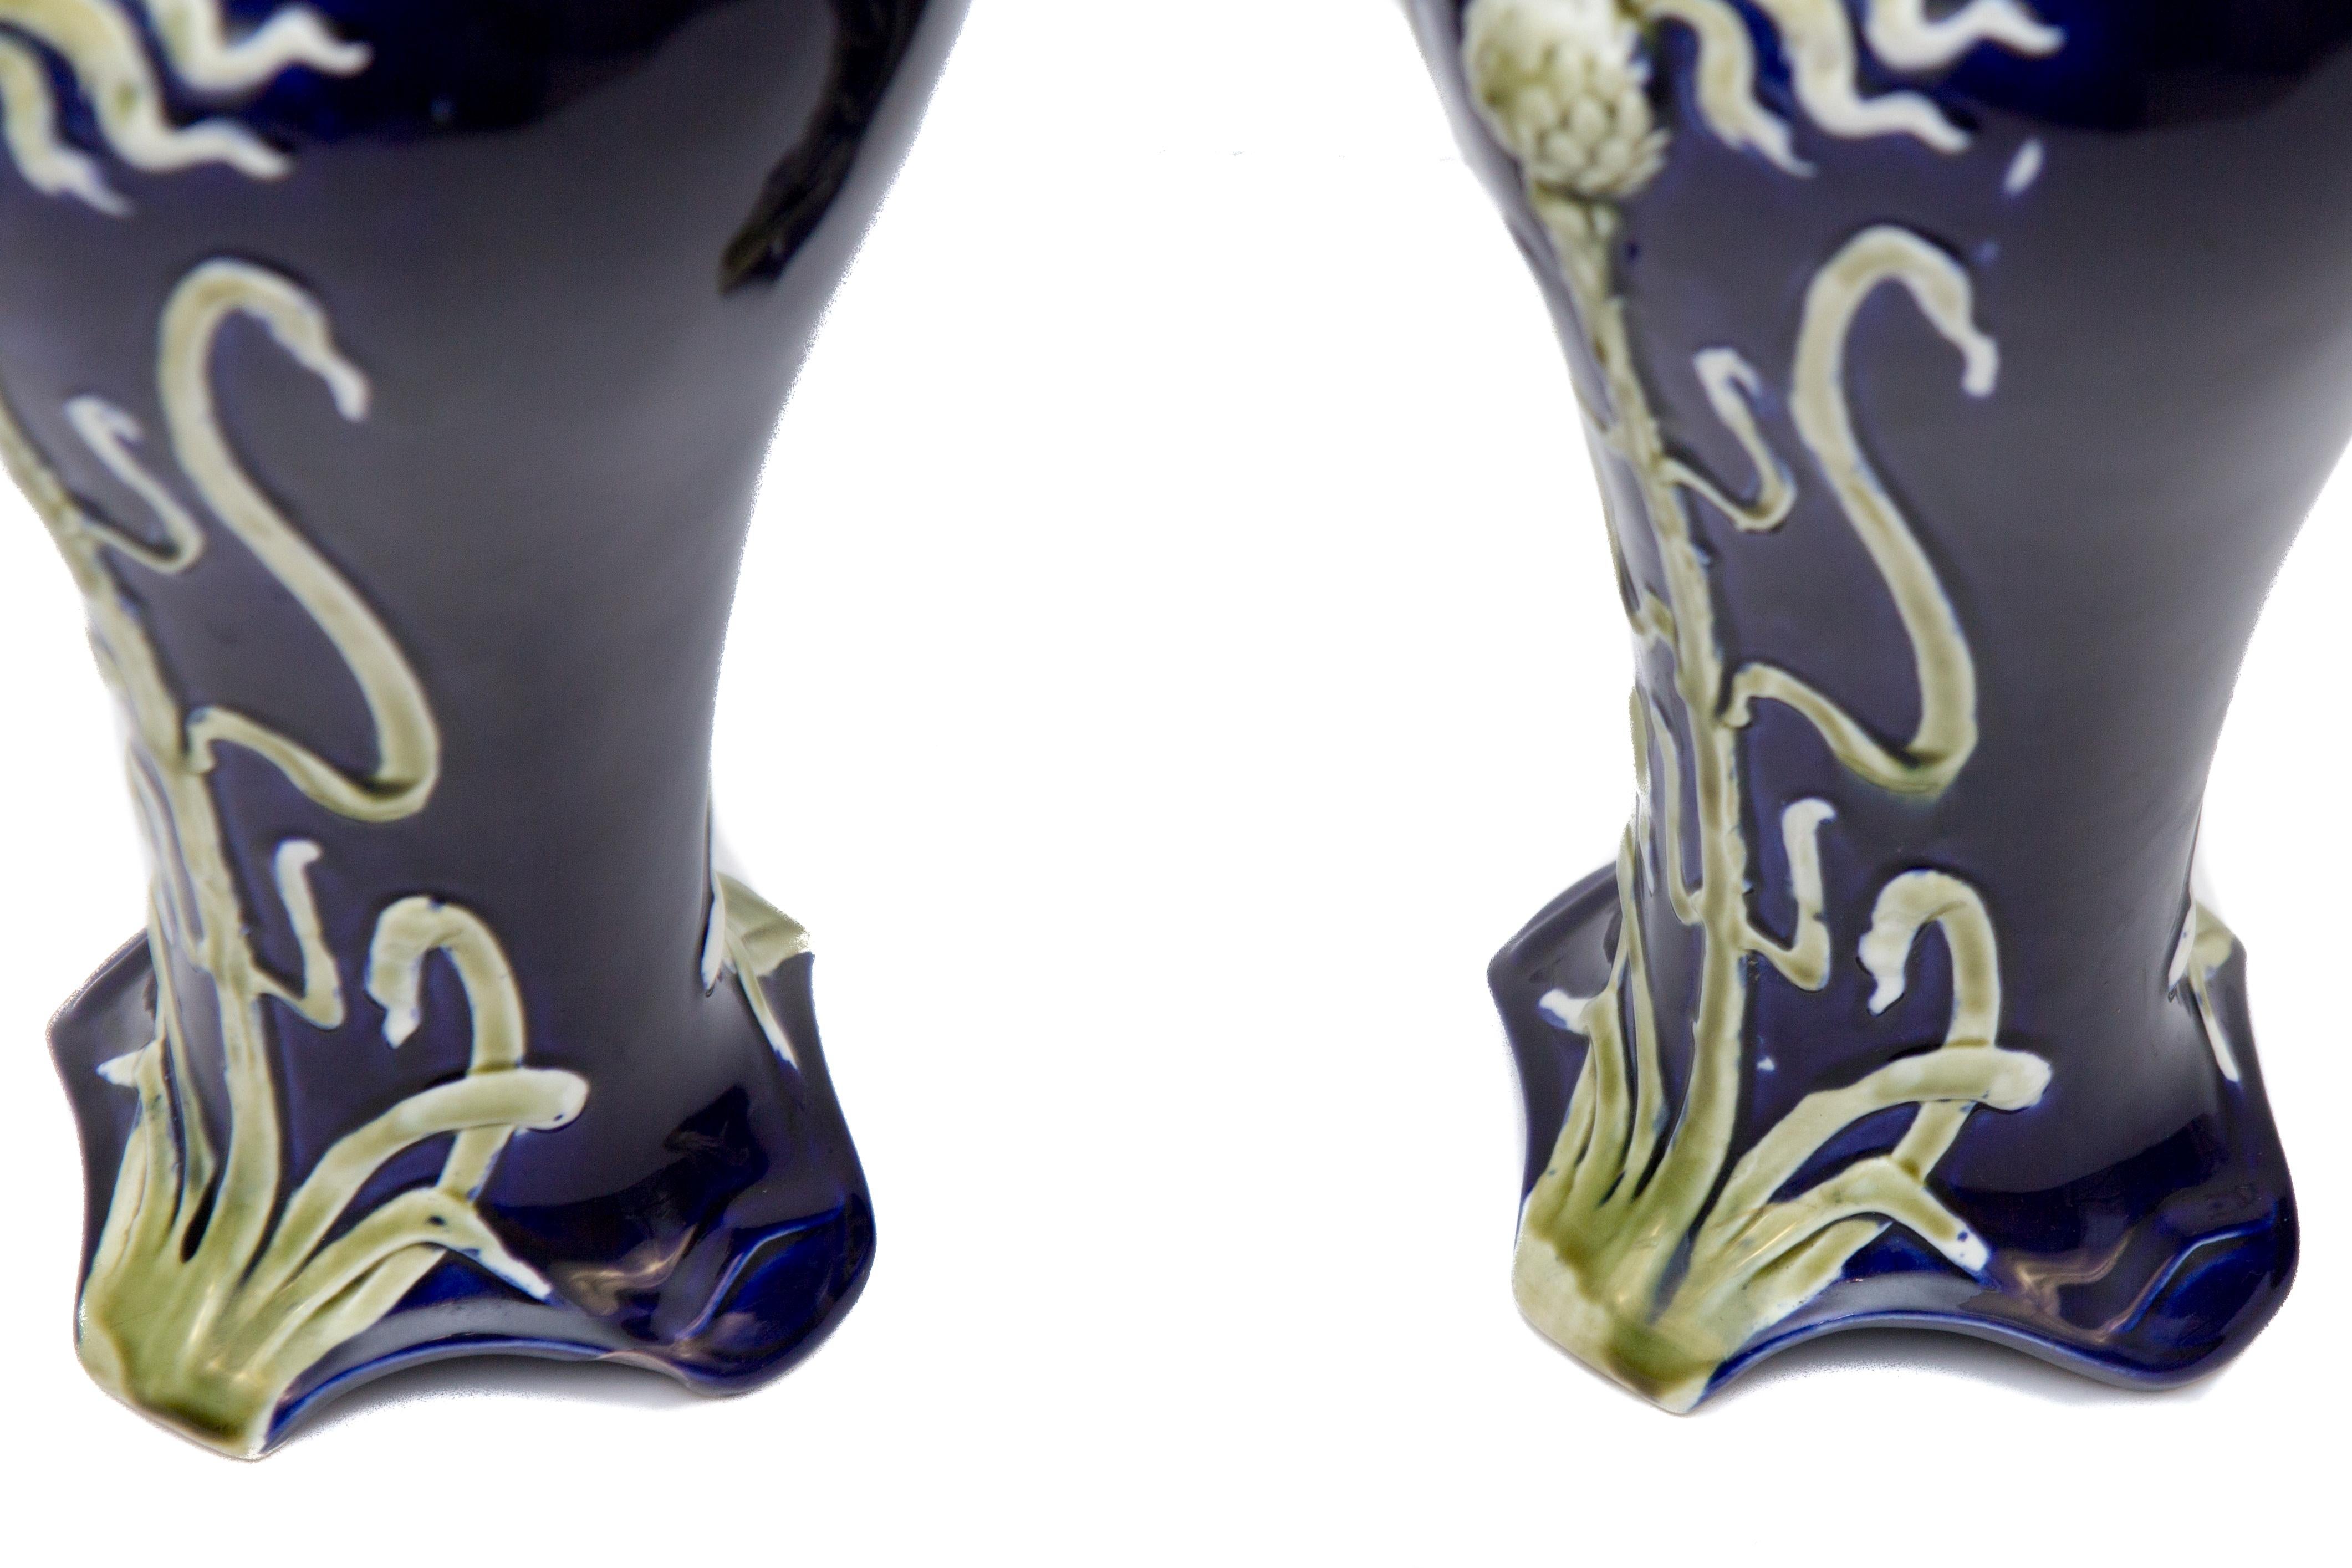 Pair of Early 20th Century French Art Nouveau Vases by J. Bernard De Bruyne 14